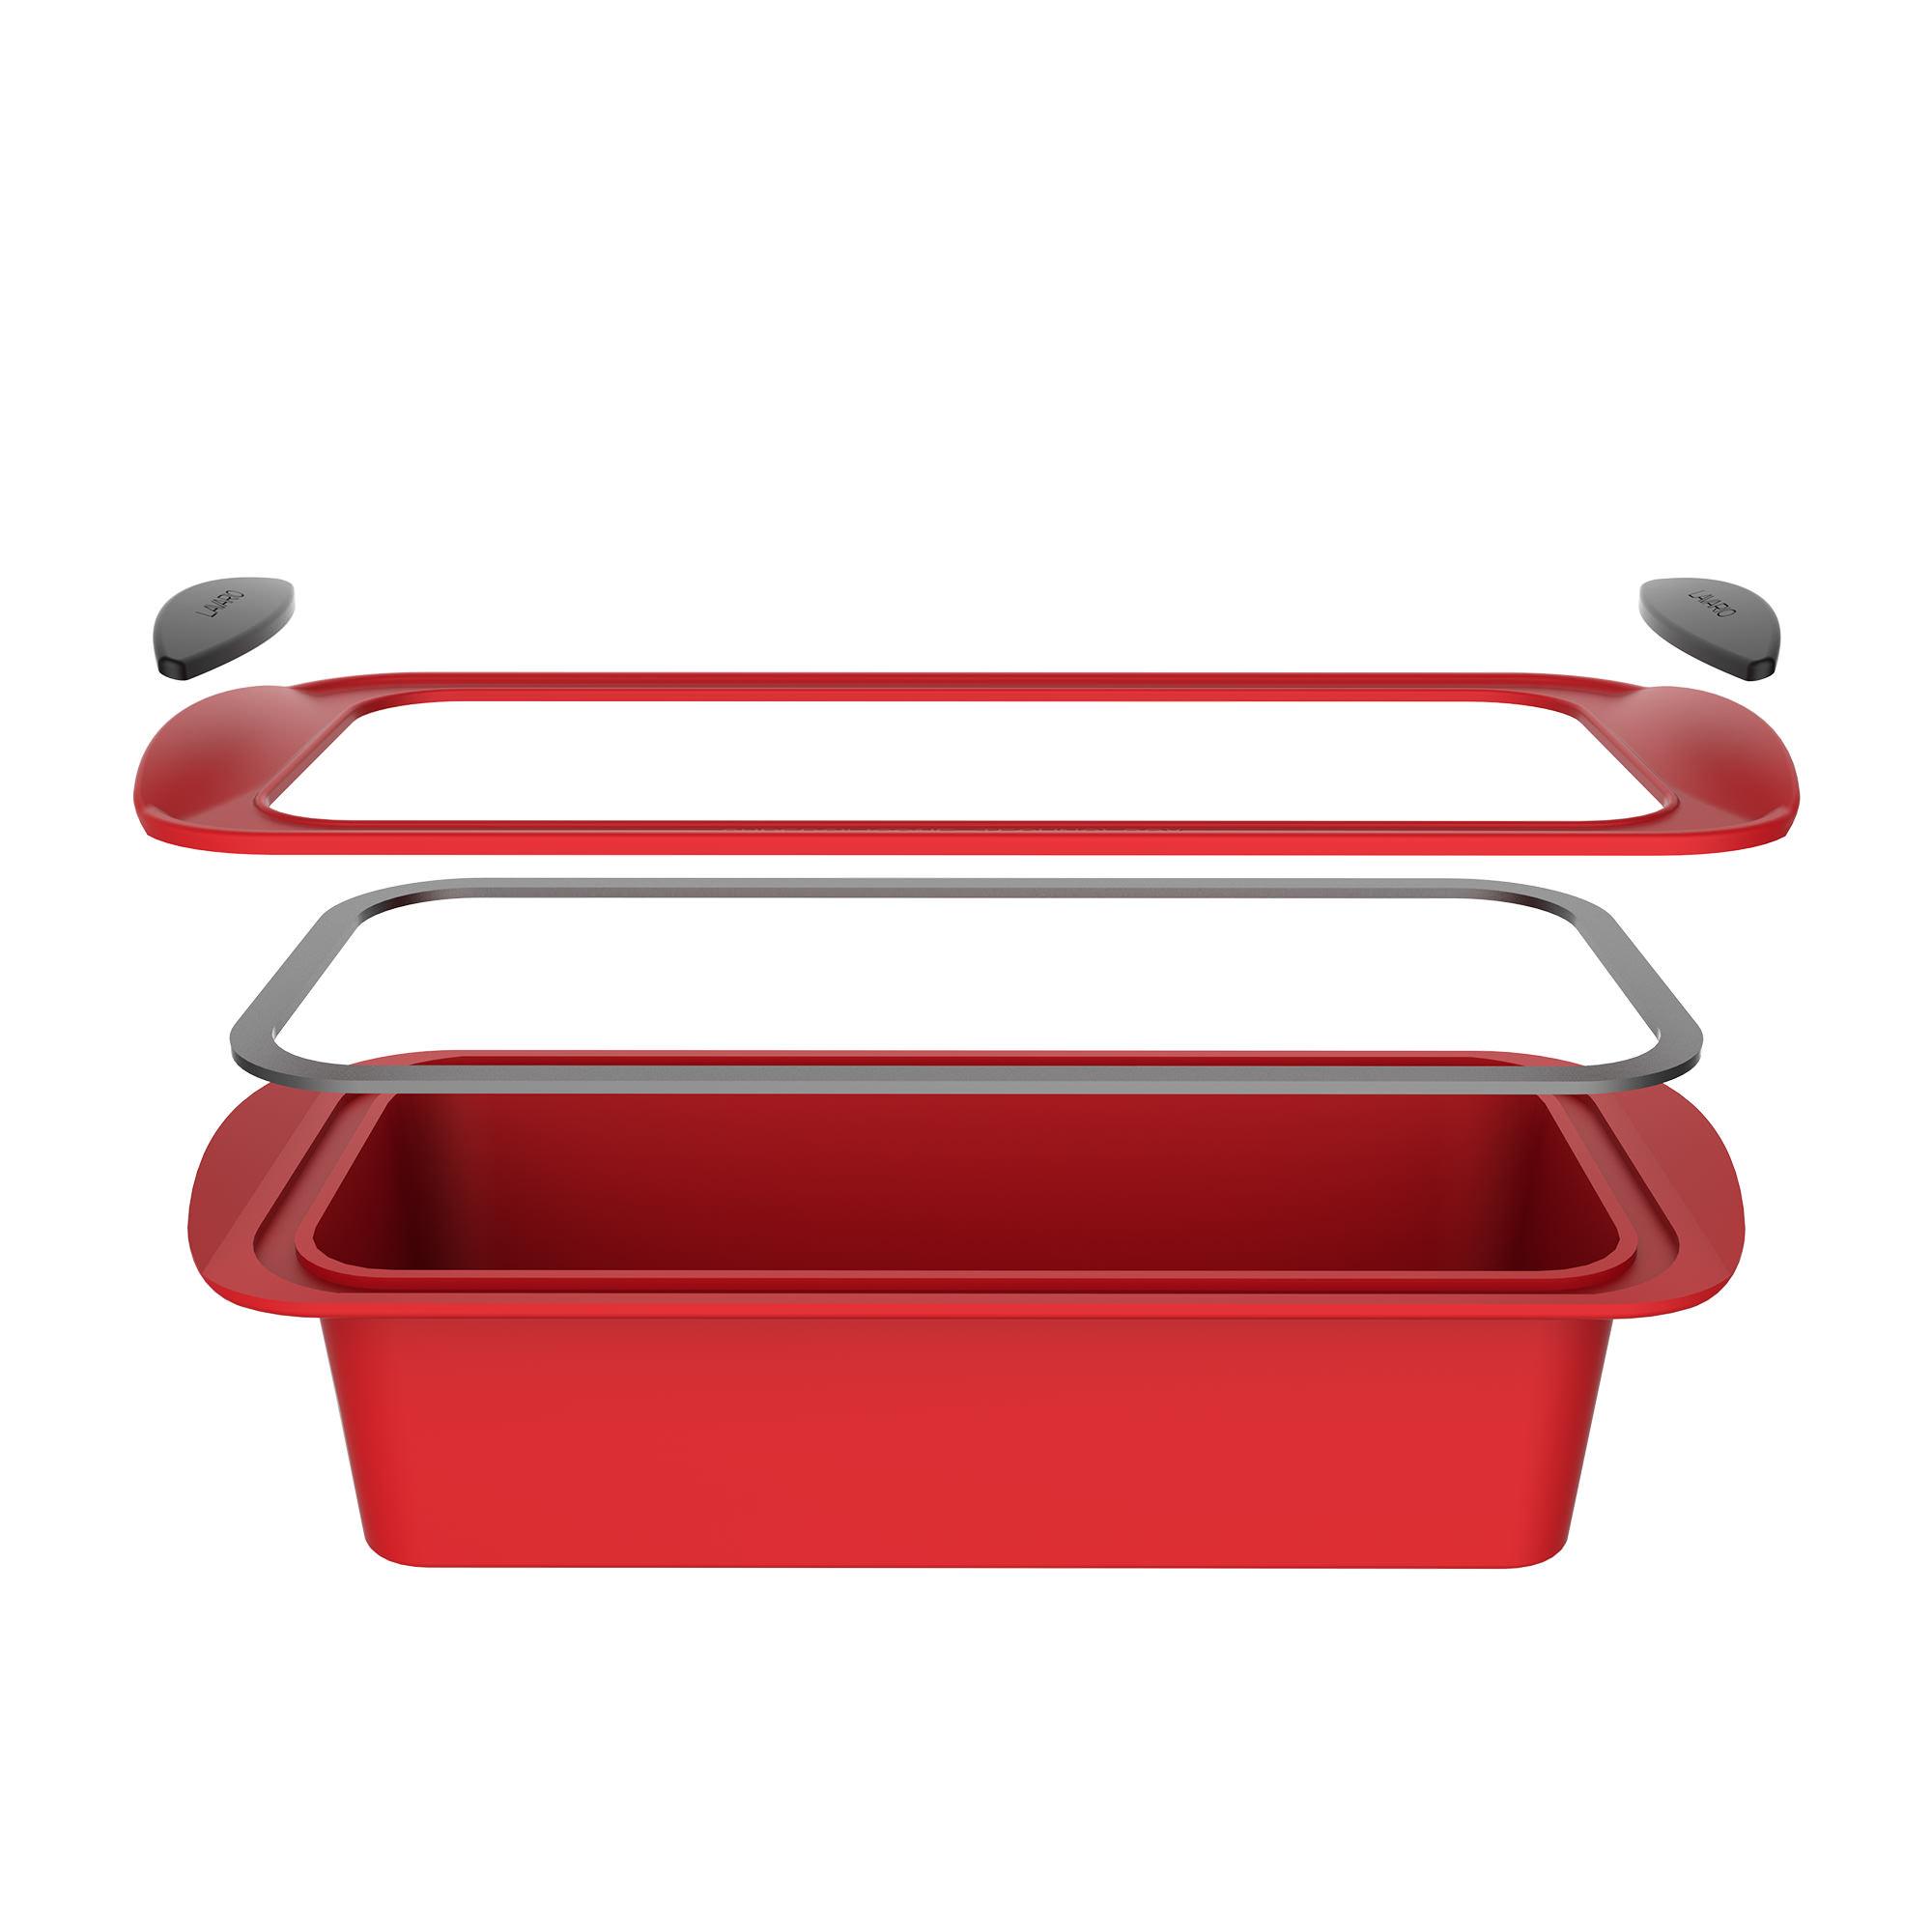 Daily Bake Silicone Loaf Pan 24x10cm Red Image 3